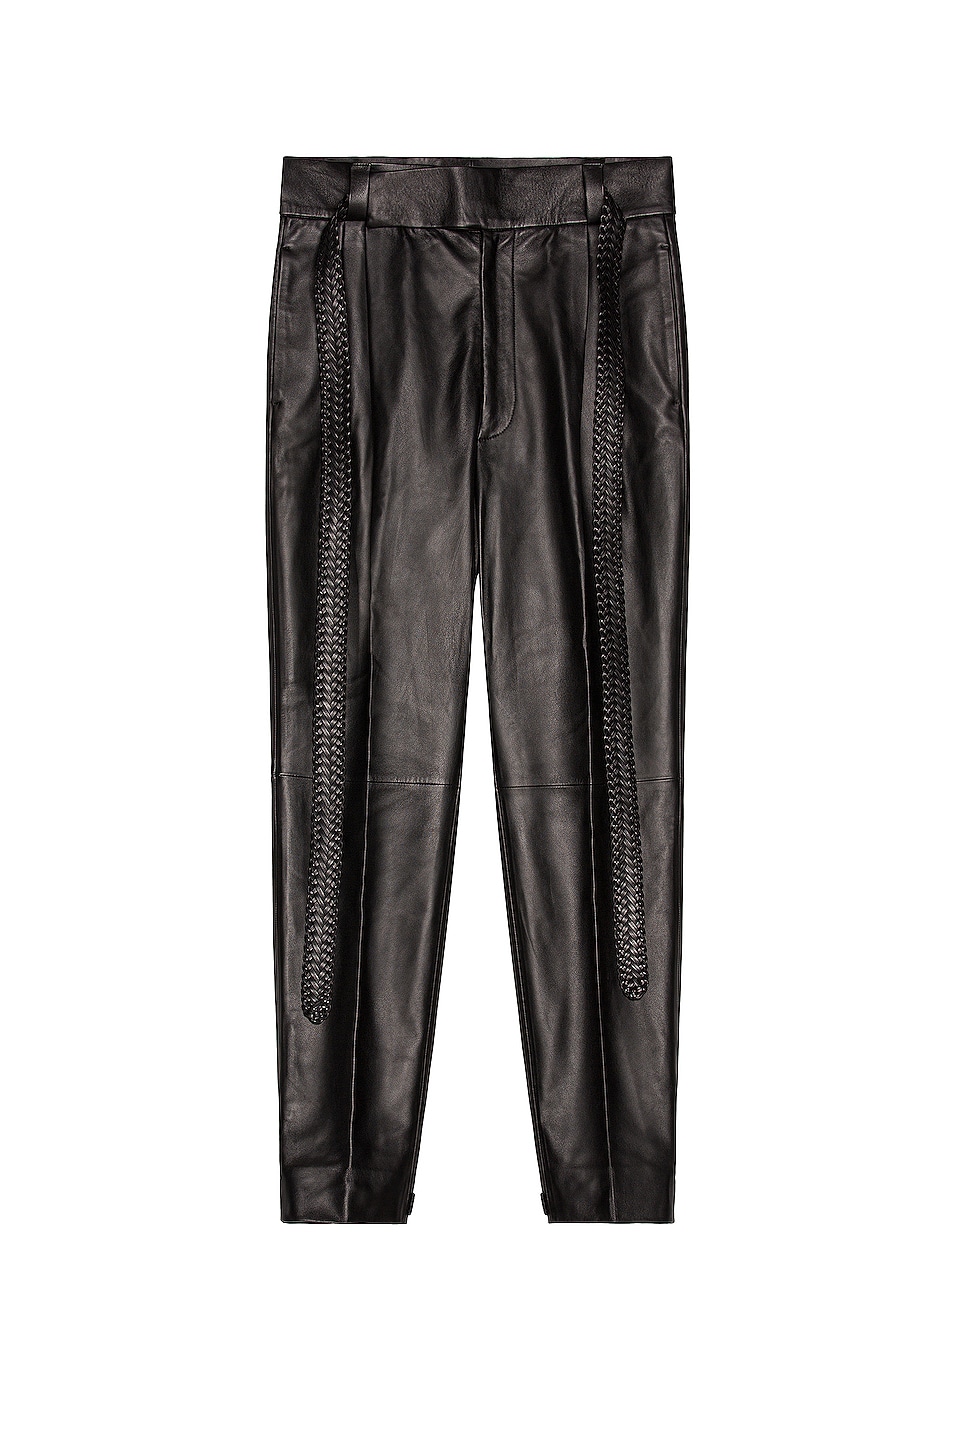 Image 1 of Fear of God Exclusively for Ermenegildo Zegna Single Pleat Calf Pant in Black